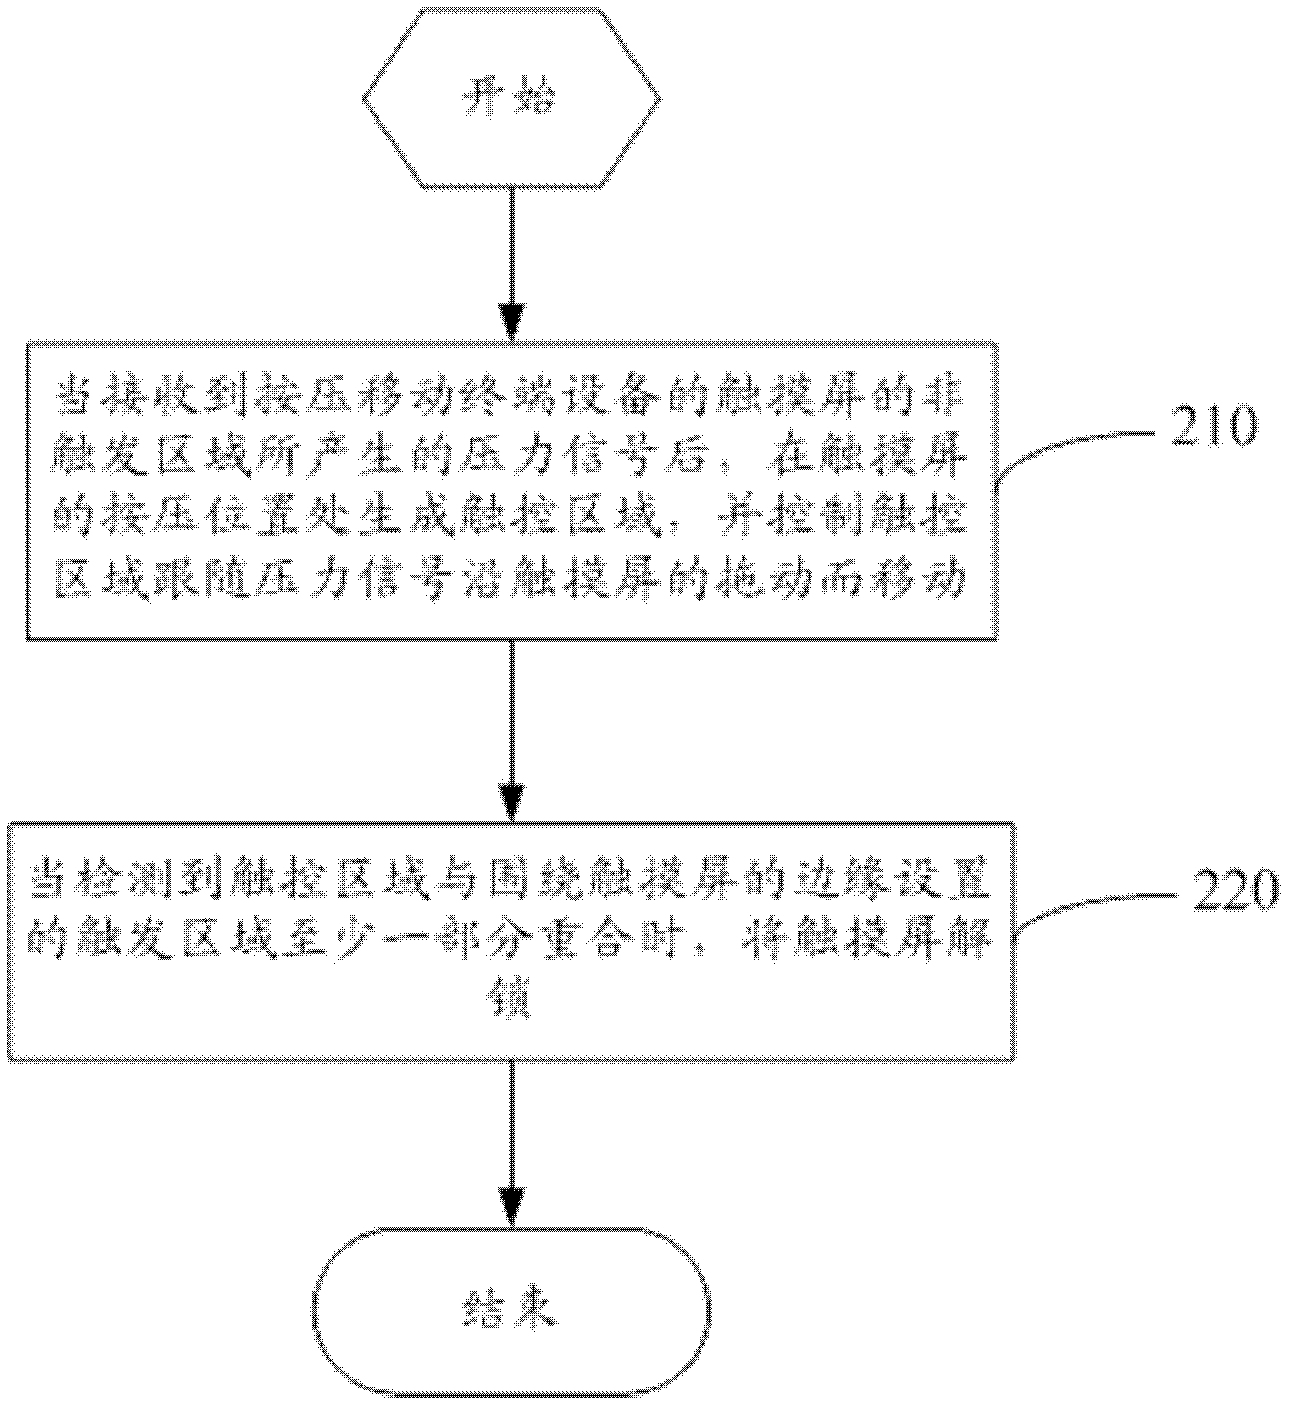 System, method and mobile terminal device for unlocking touch screens